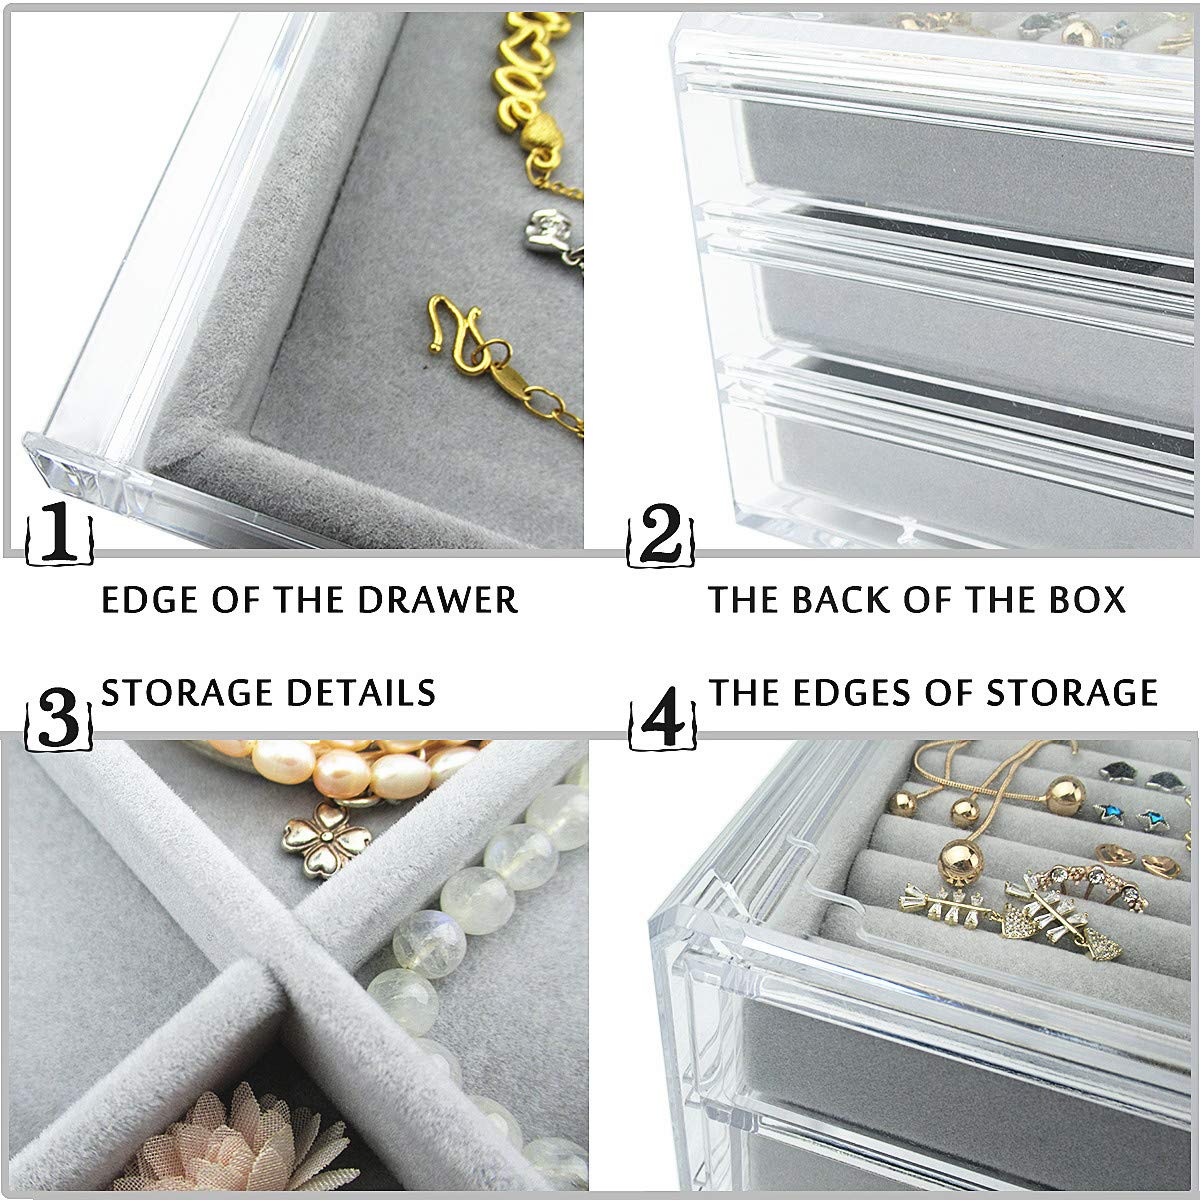 Acrylic Jewelry Box 3 Drawers, Velvet Jewellery Organizer, Earring Rings Necklaces Bracelets Display Case Gift for Women, Girls